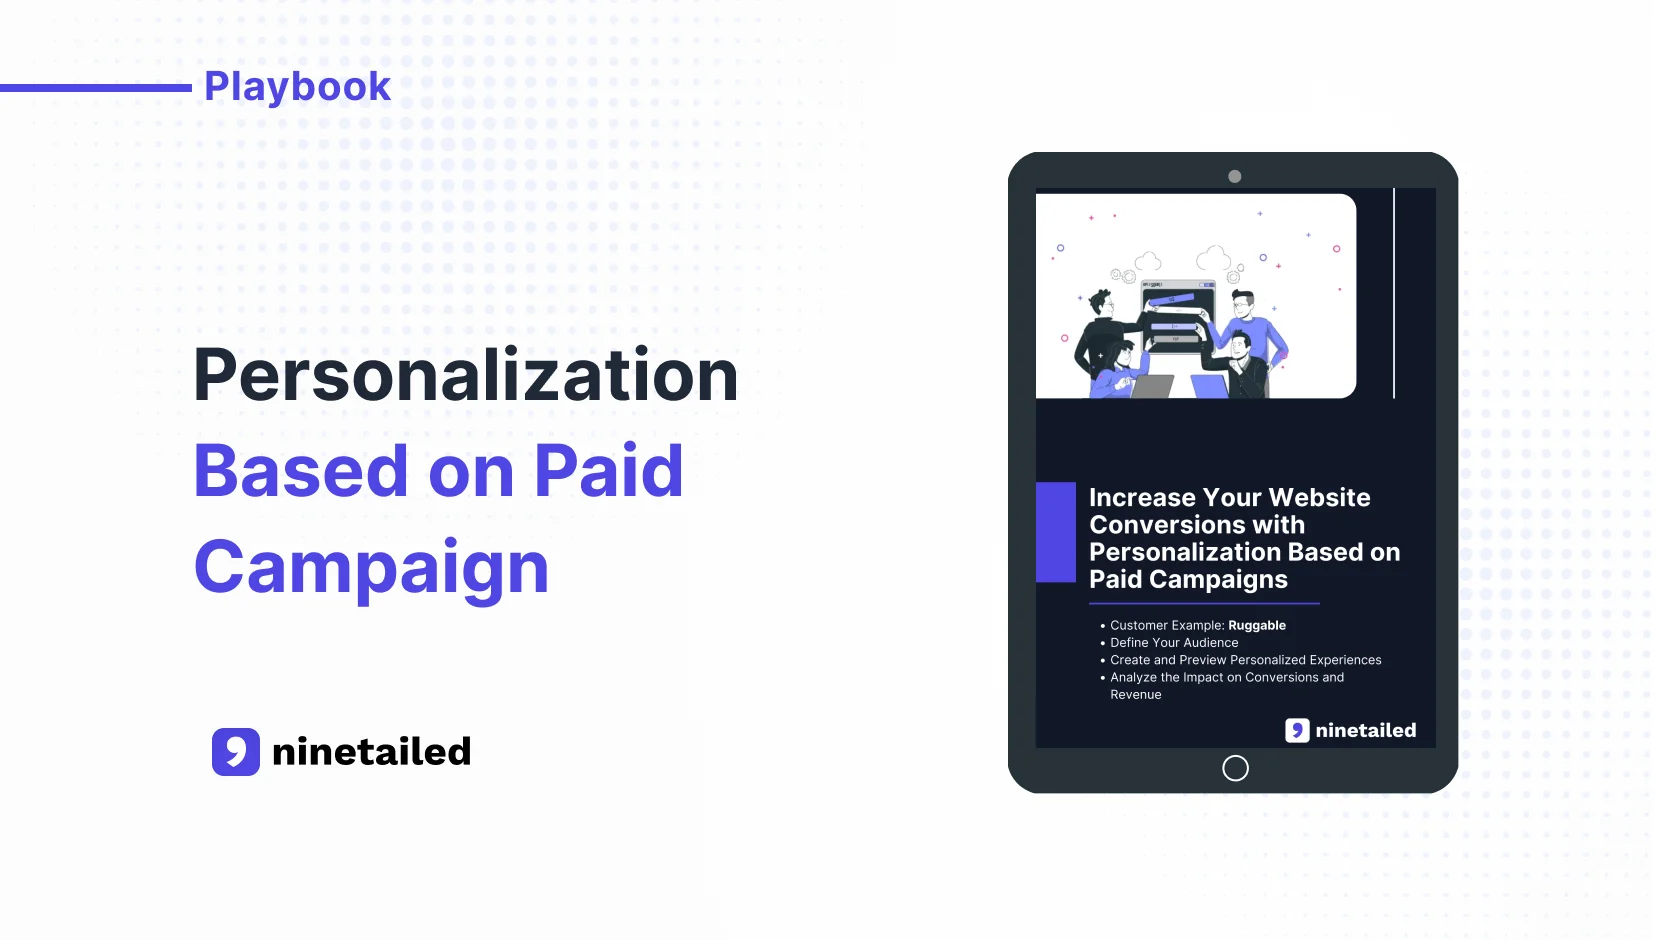 Ebook - Personalization Based on Paid Campaigns